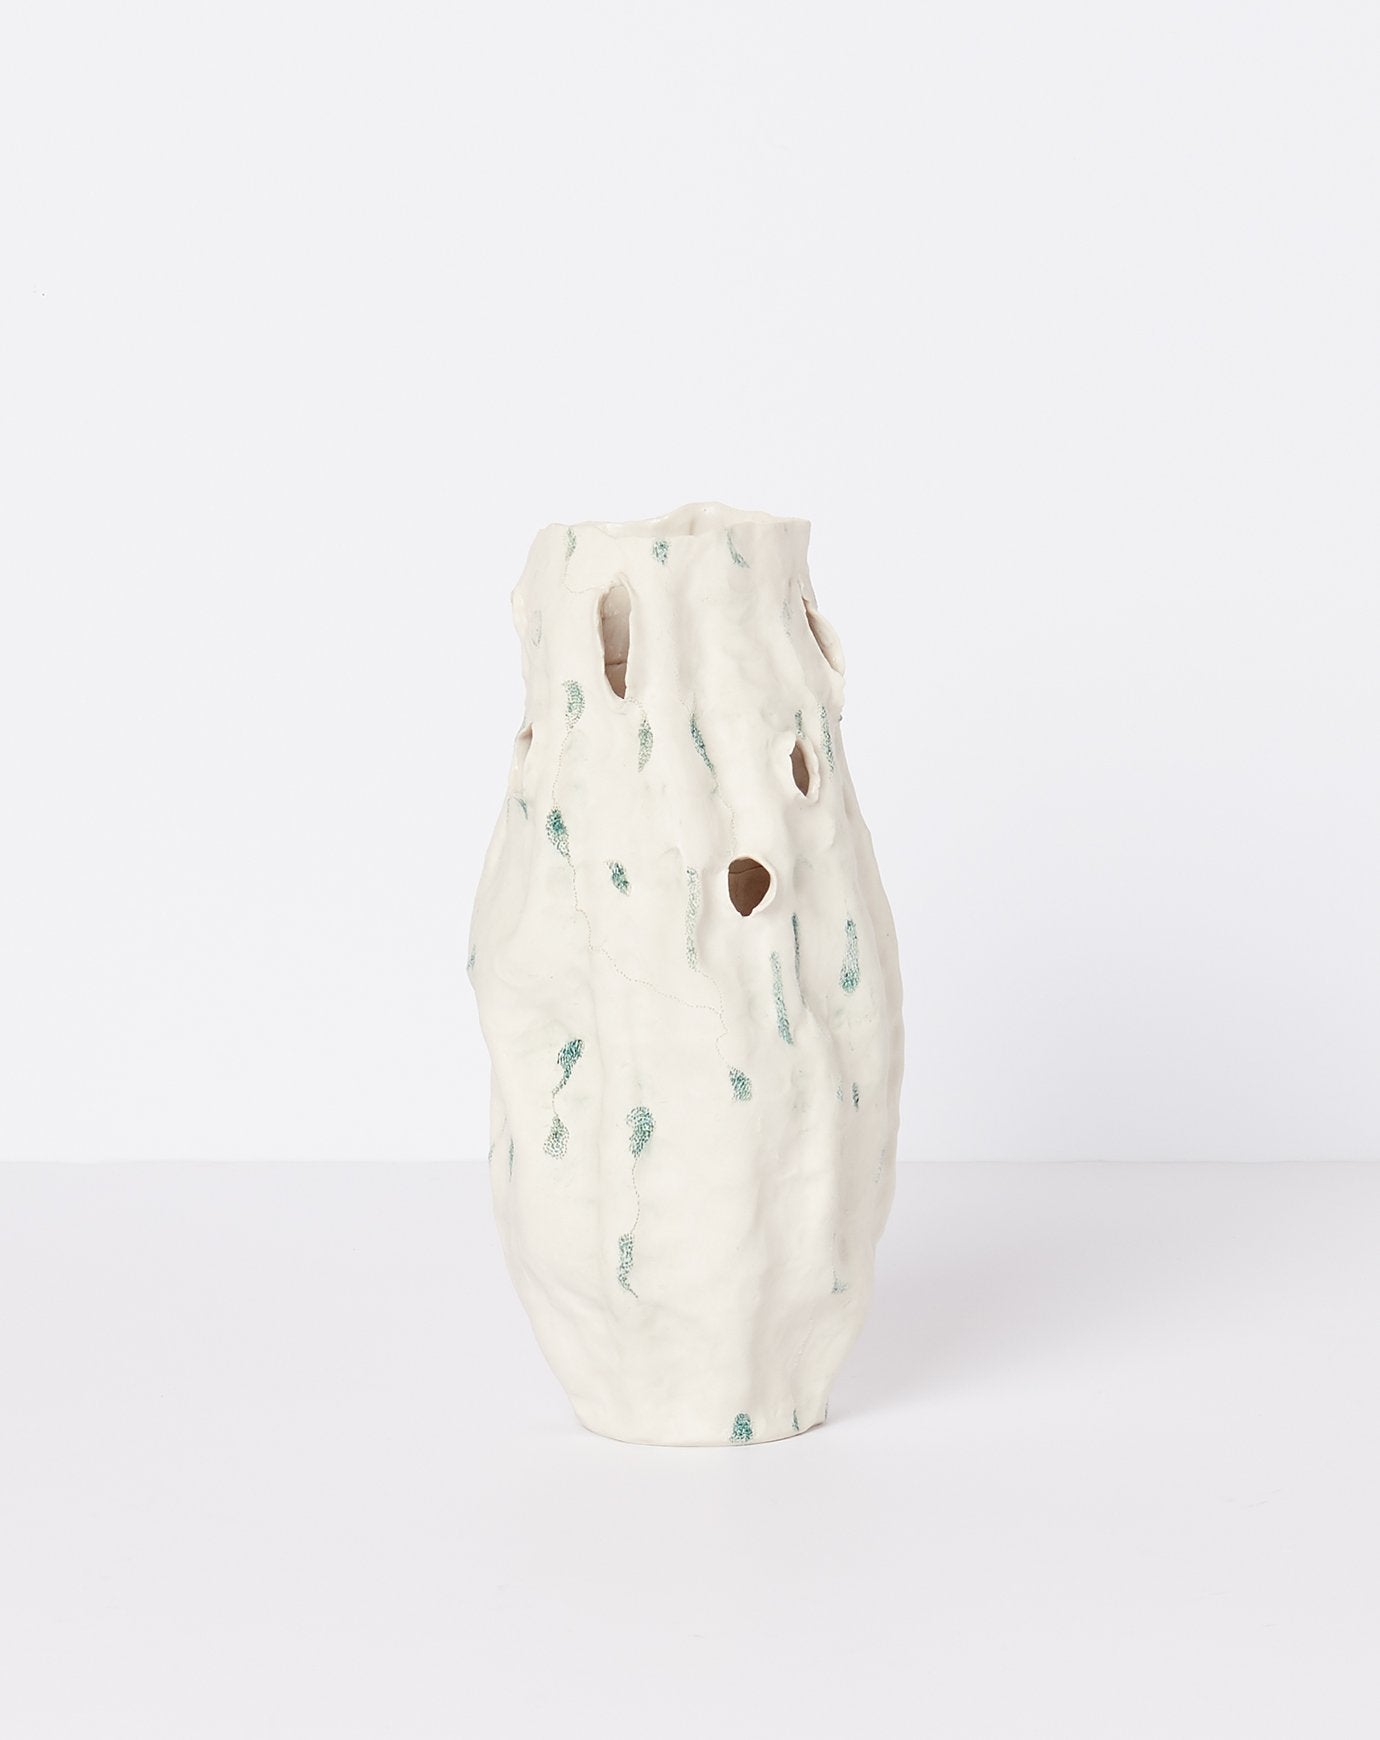 Lily Fein Green Dots Vase